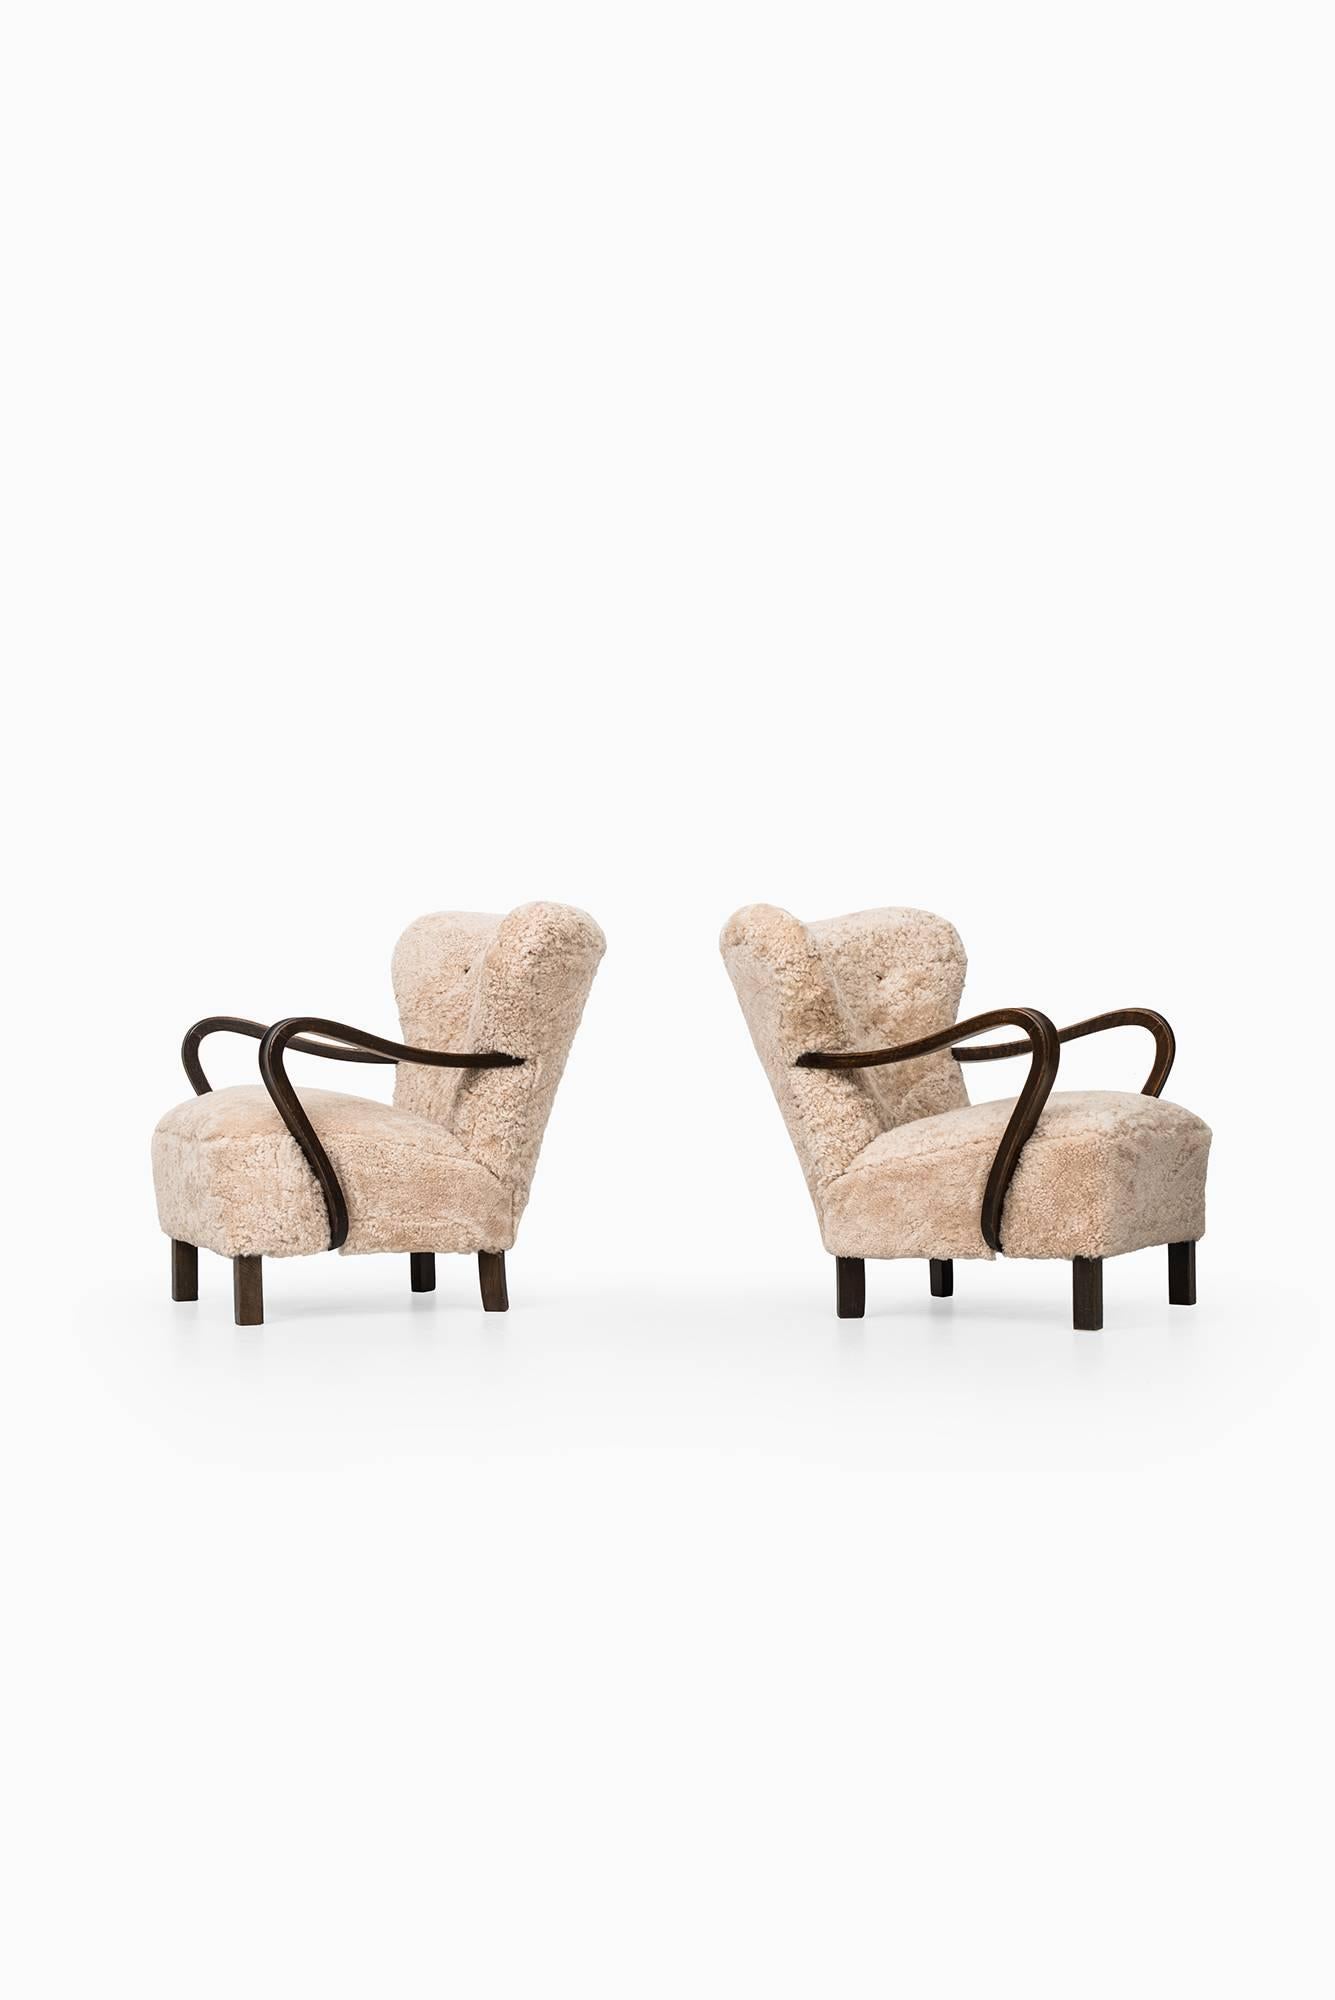 Rare pair of easy chairs from the 1940s. Produced in Denmark.